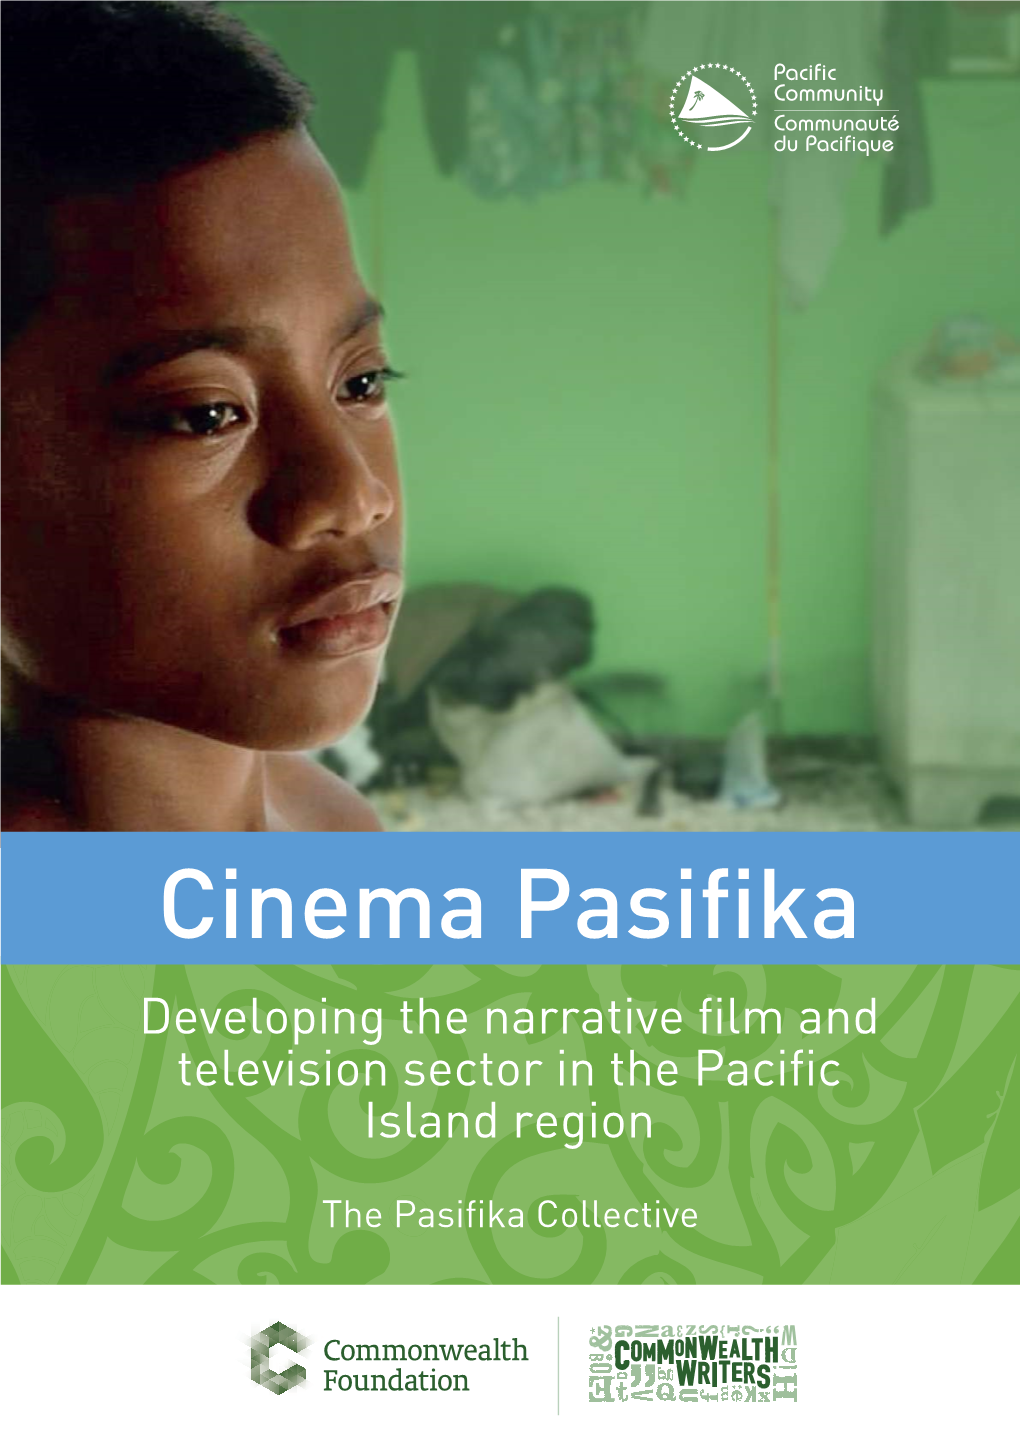 Cinema Pasifika Developing the Narrative Film and Television Sector in the Pacific Island Region